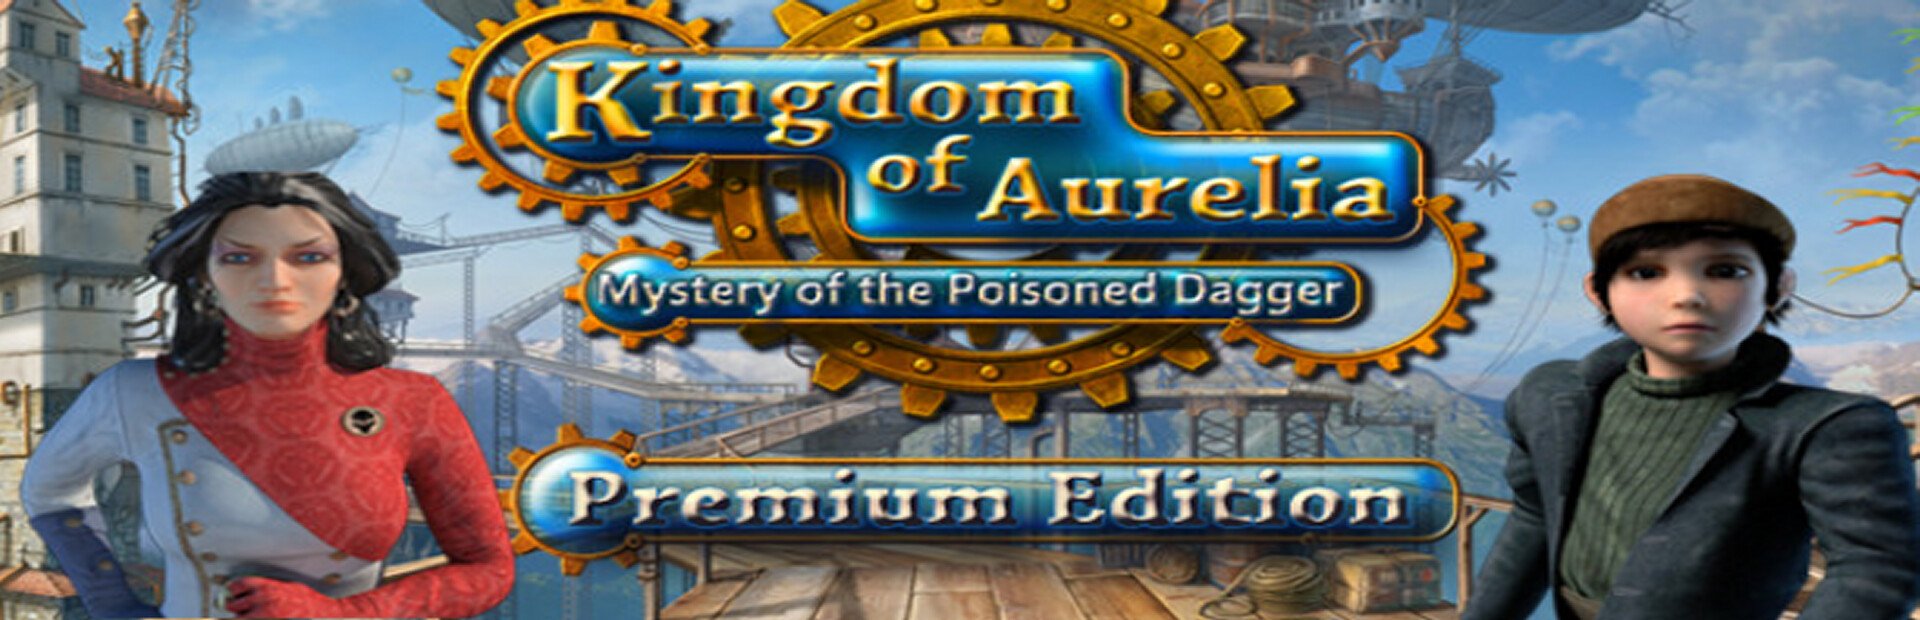 Kingdom of Aurelia: Mystery of the Poisoned Dagger cover image